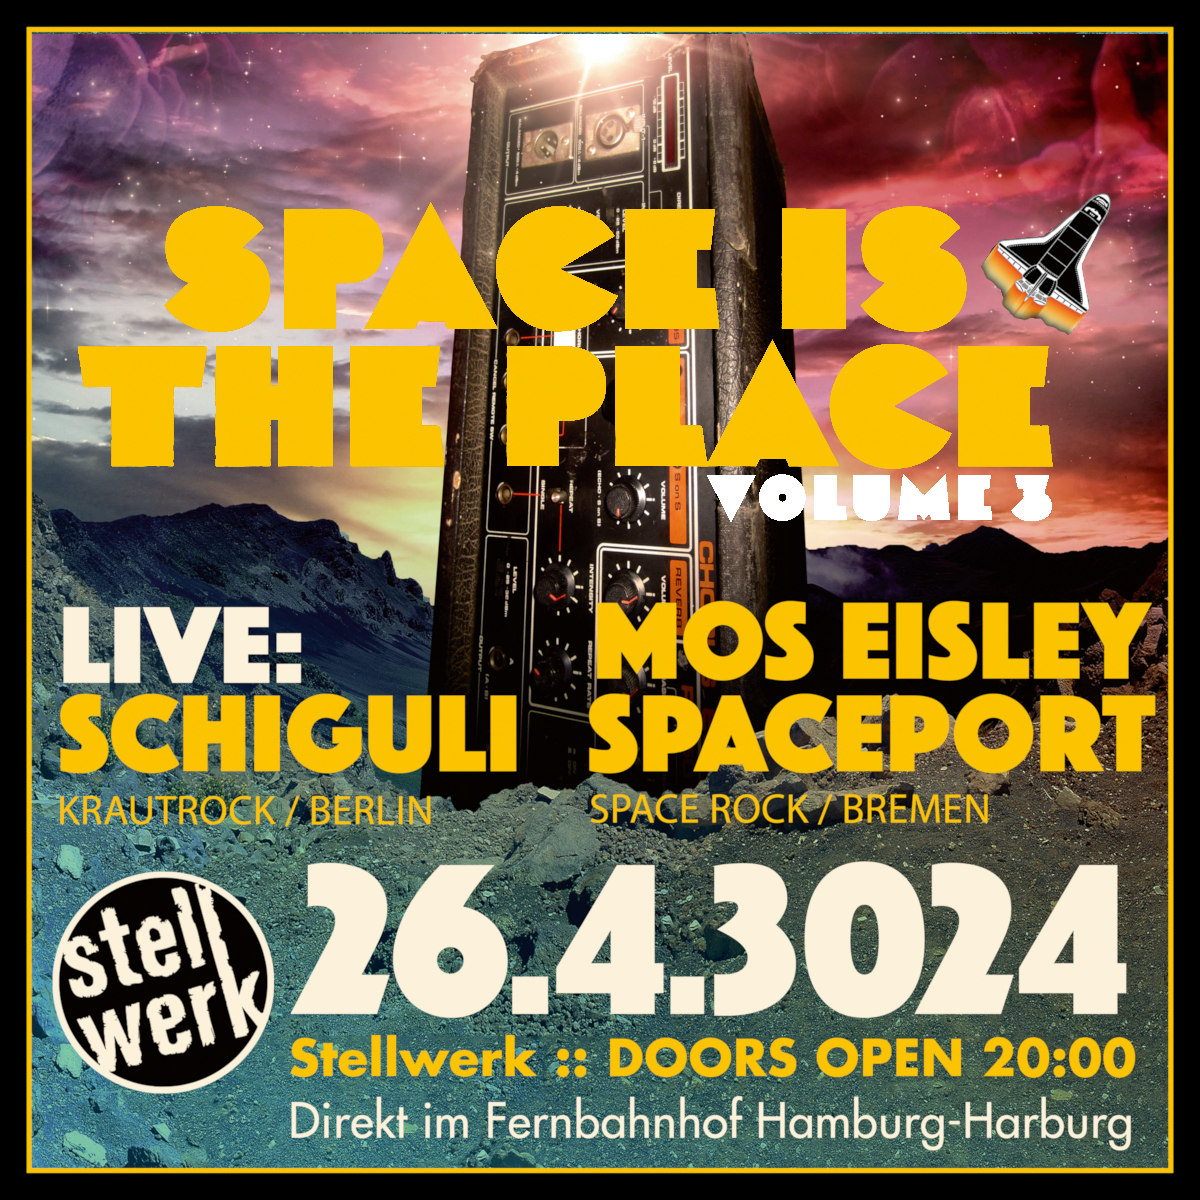 SITP3 BAHNHOF DIN FB 89403 SPACE IS THE PLACE #3